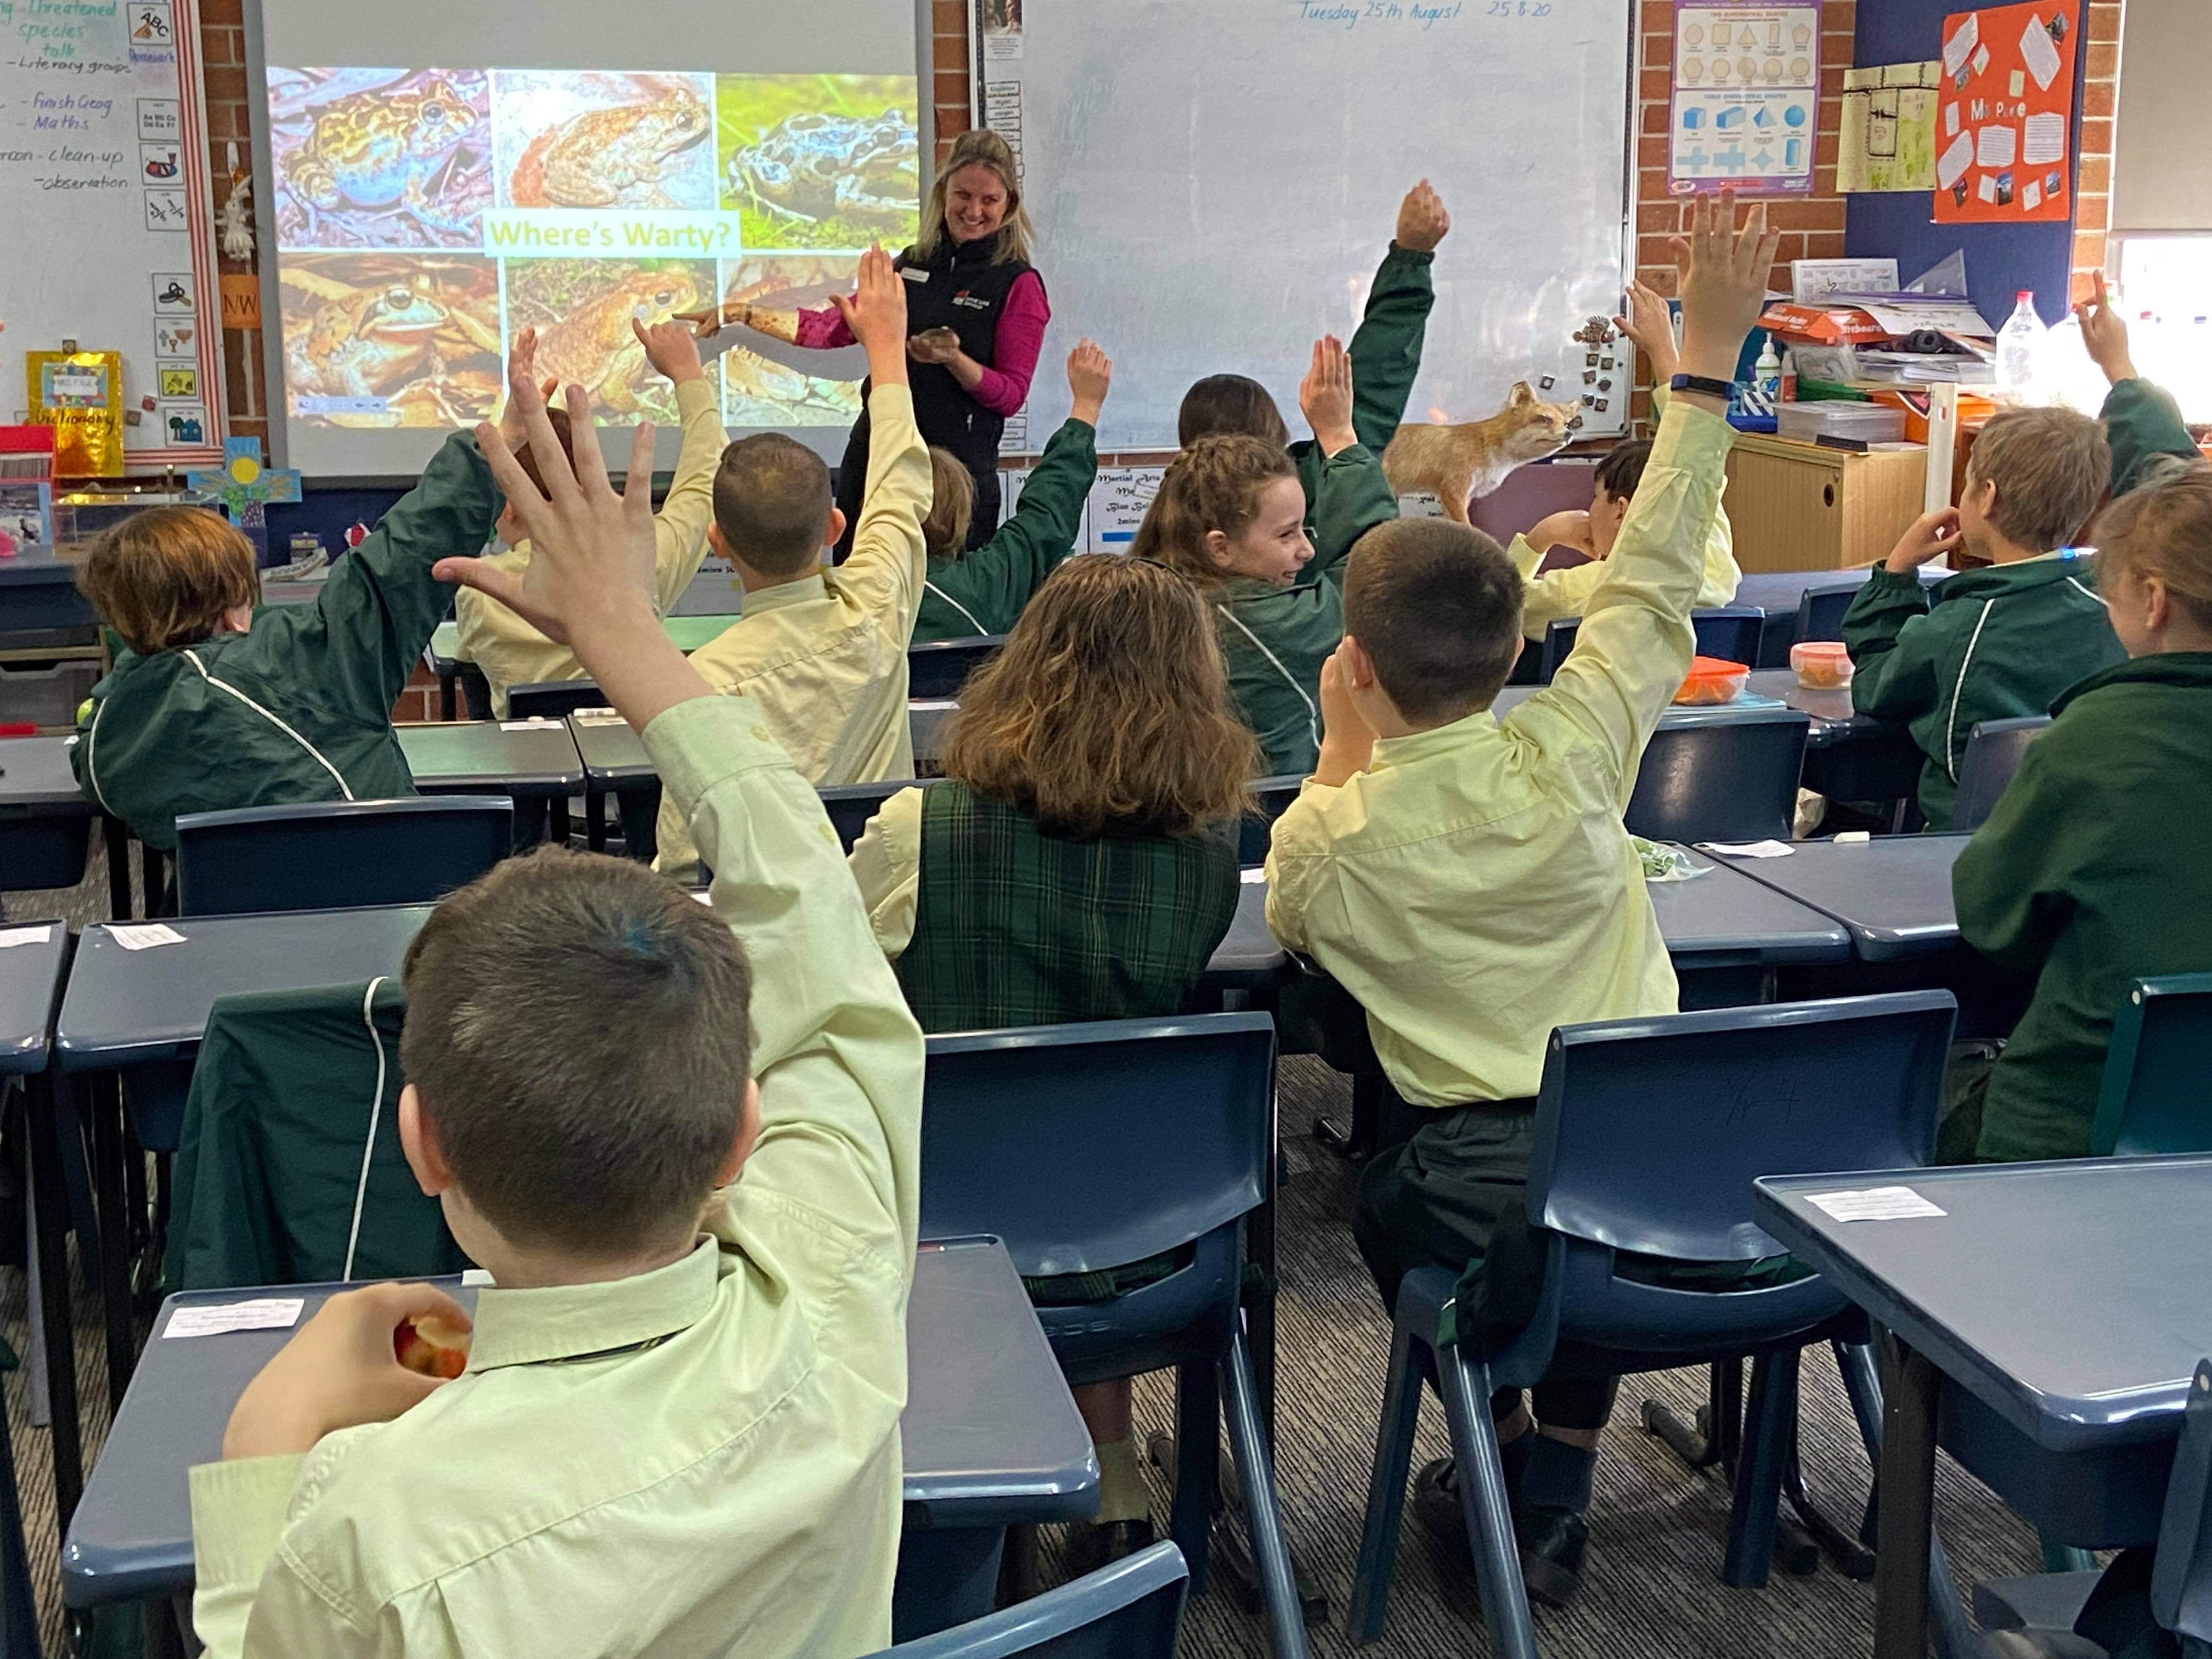 A group of children with their hands up in a classroom